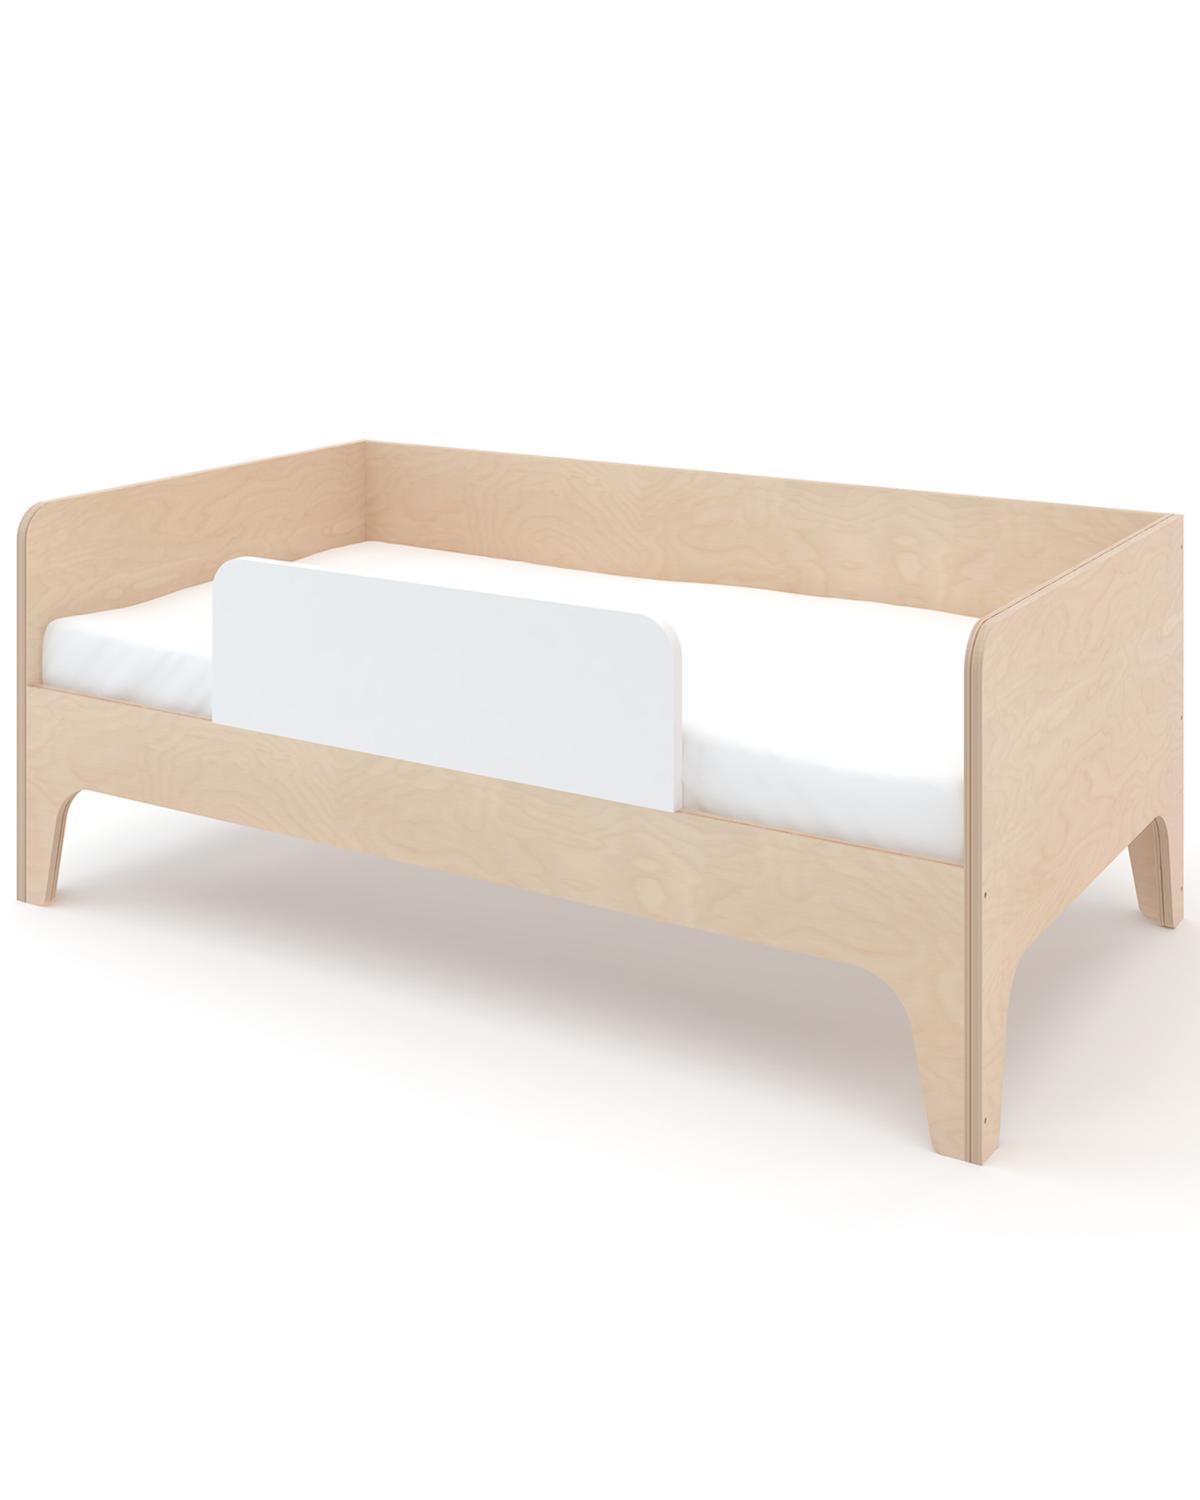 Little oeuf room perch toddler bed in birch